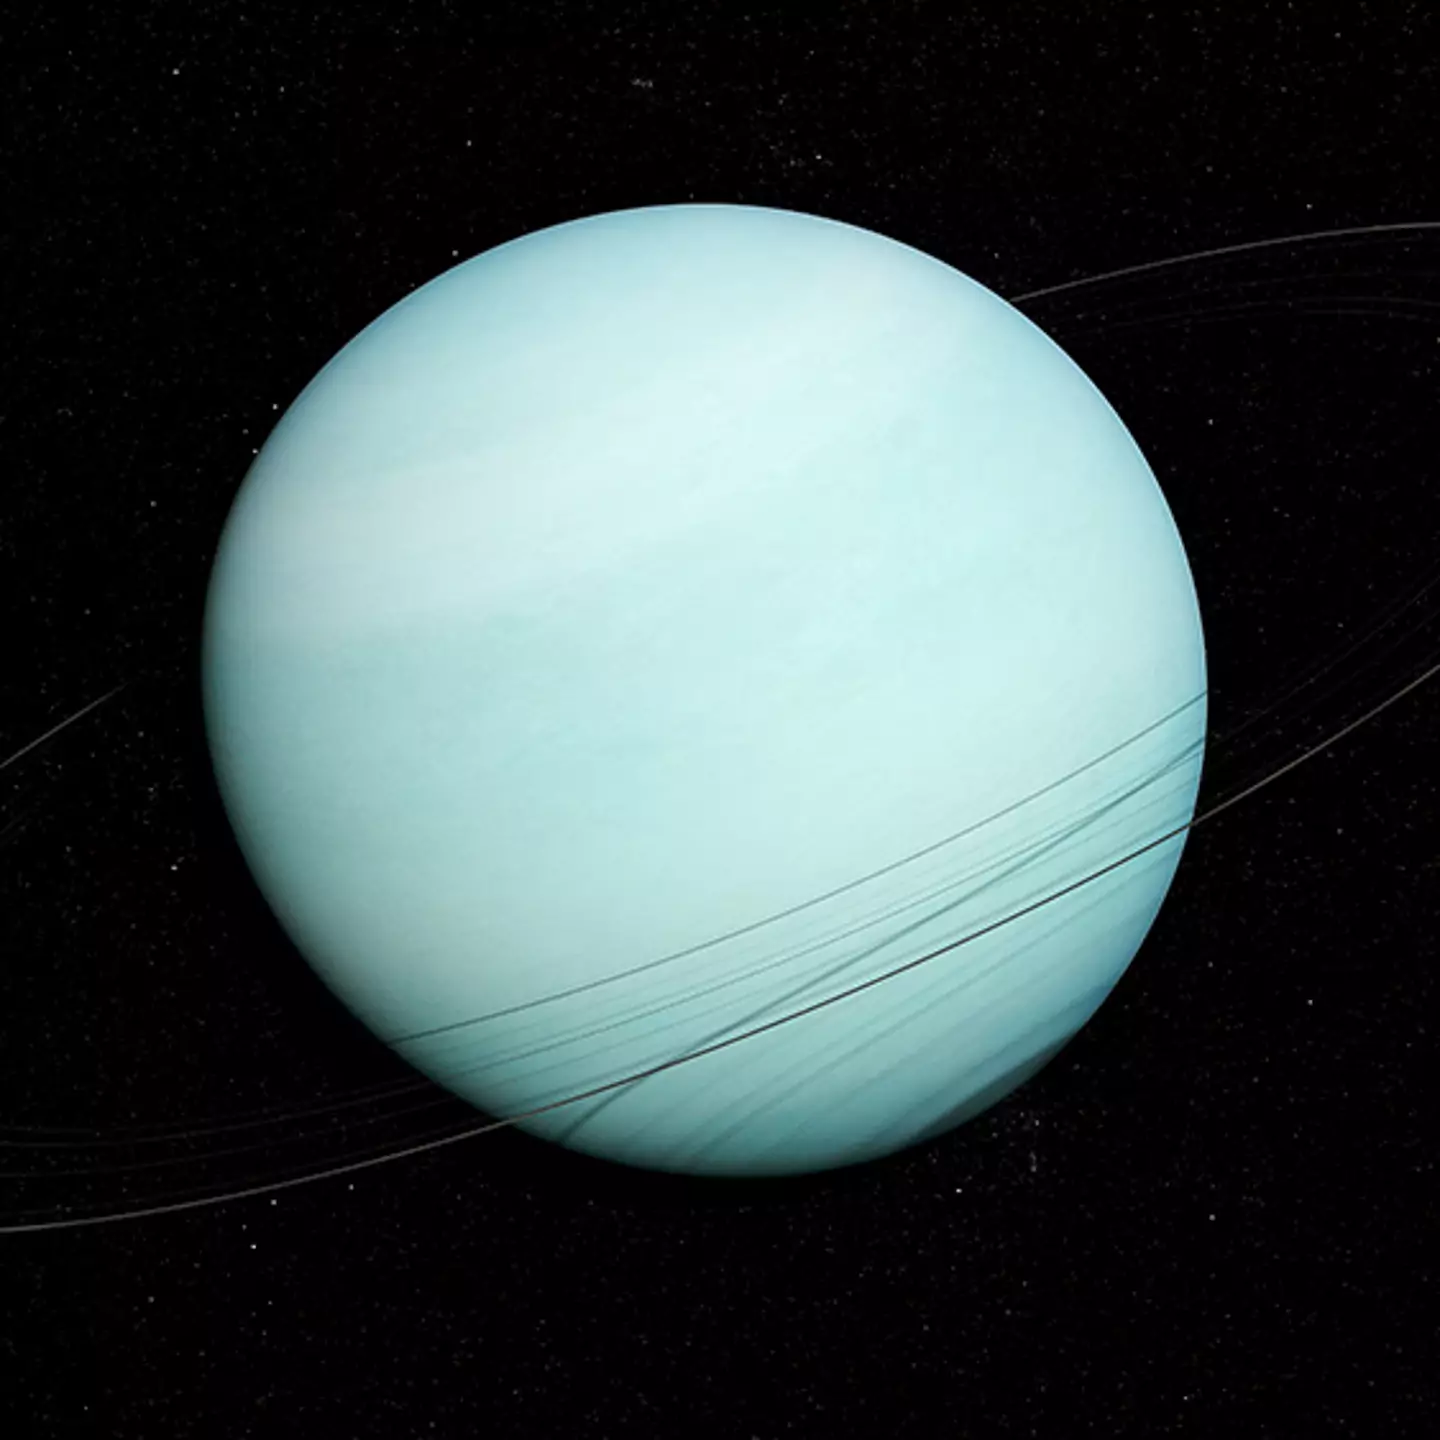 UK space scientists urged to join Nasa's mission to Uranus in hopes of finding alien life